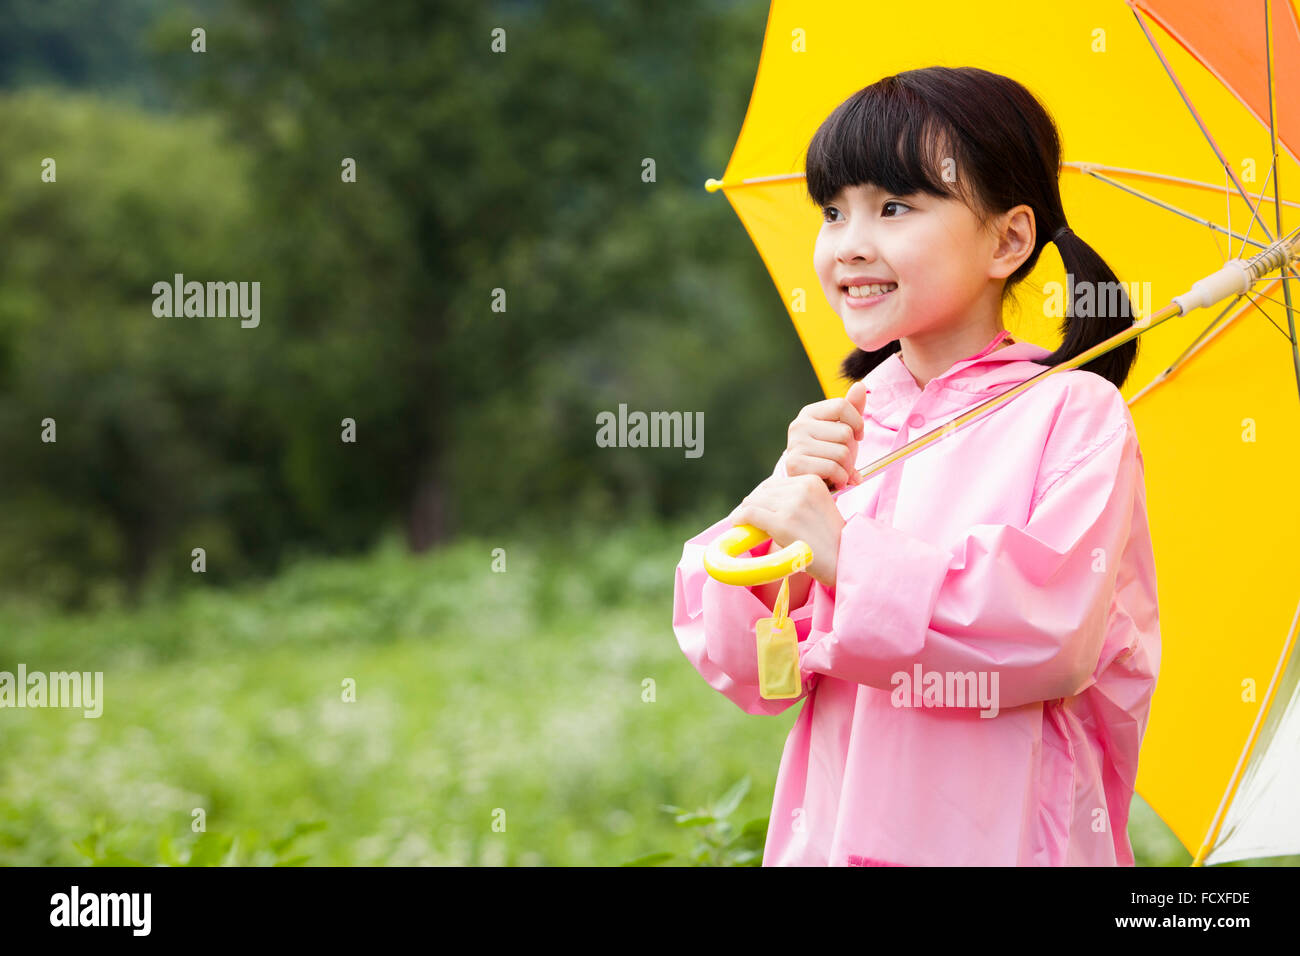 Girl in rain coat under an umbrella at field with a smile Stock Photo